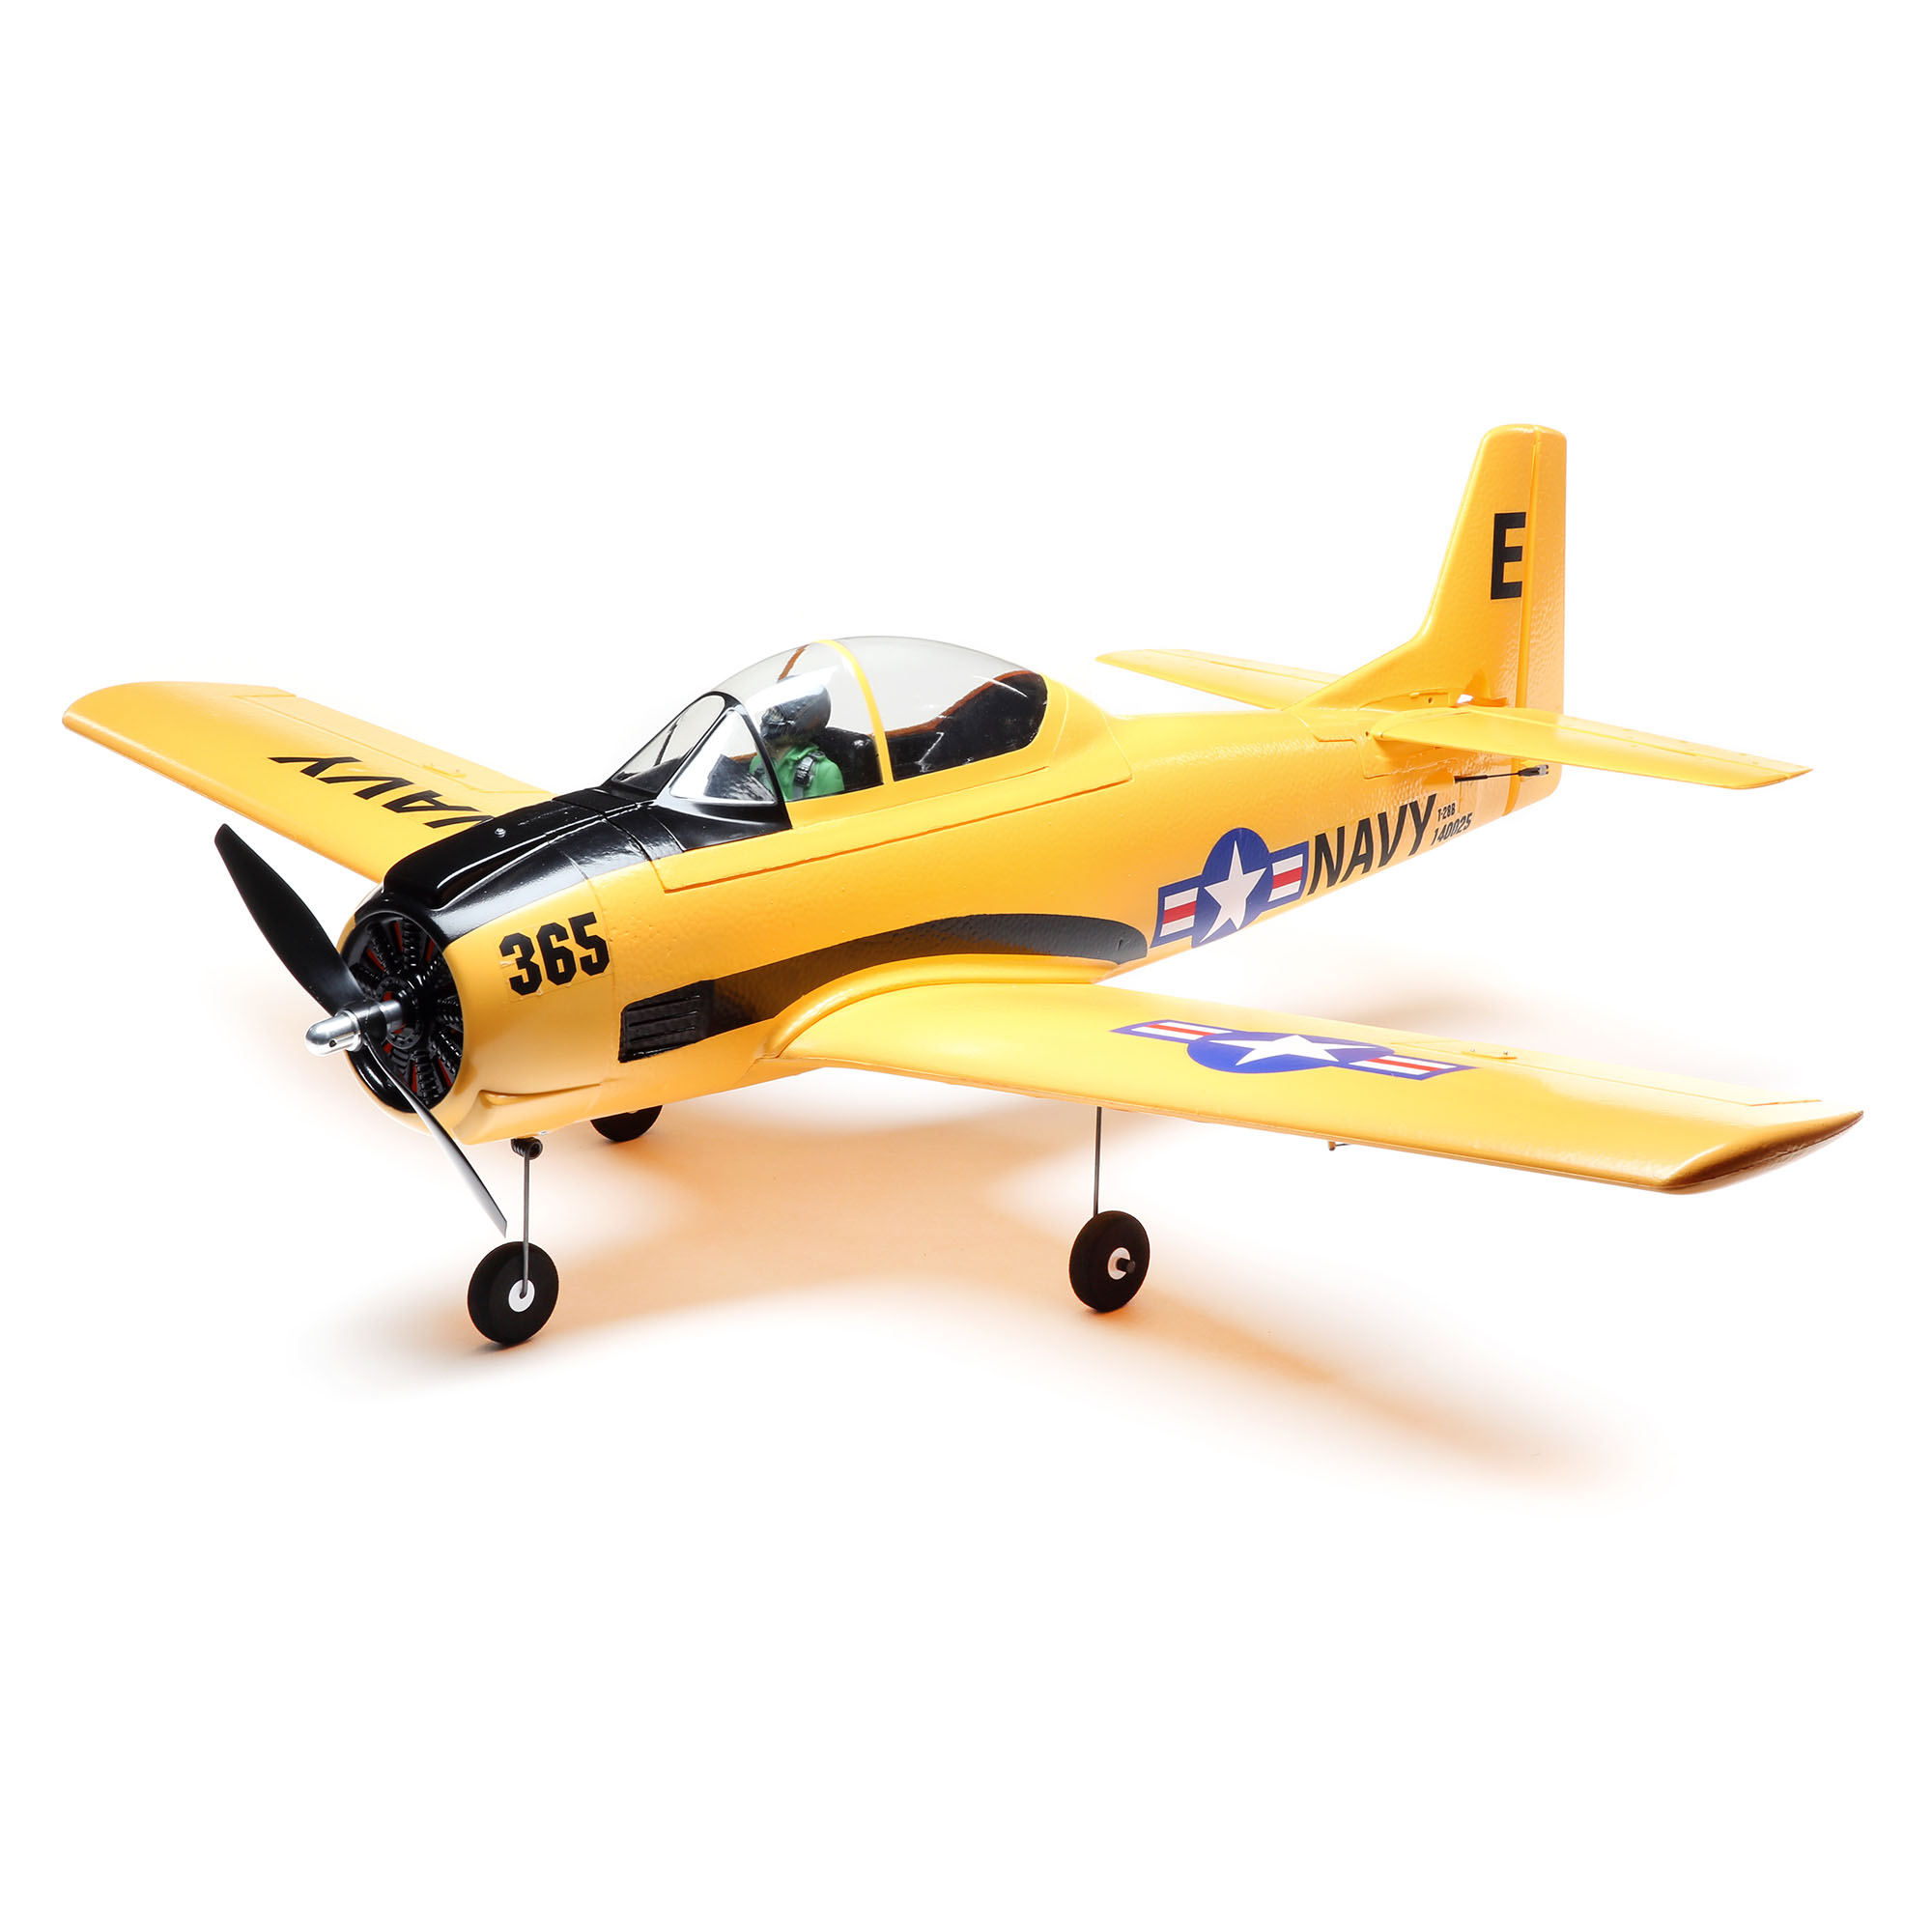 Discussion Durafly T-28 Trojan 1100mm v2 - Page 60 - RC Groups